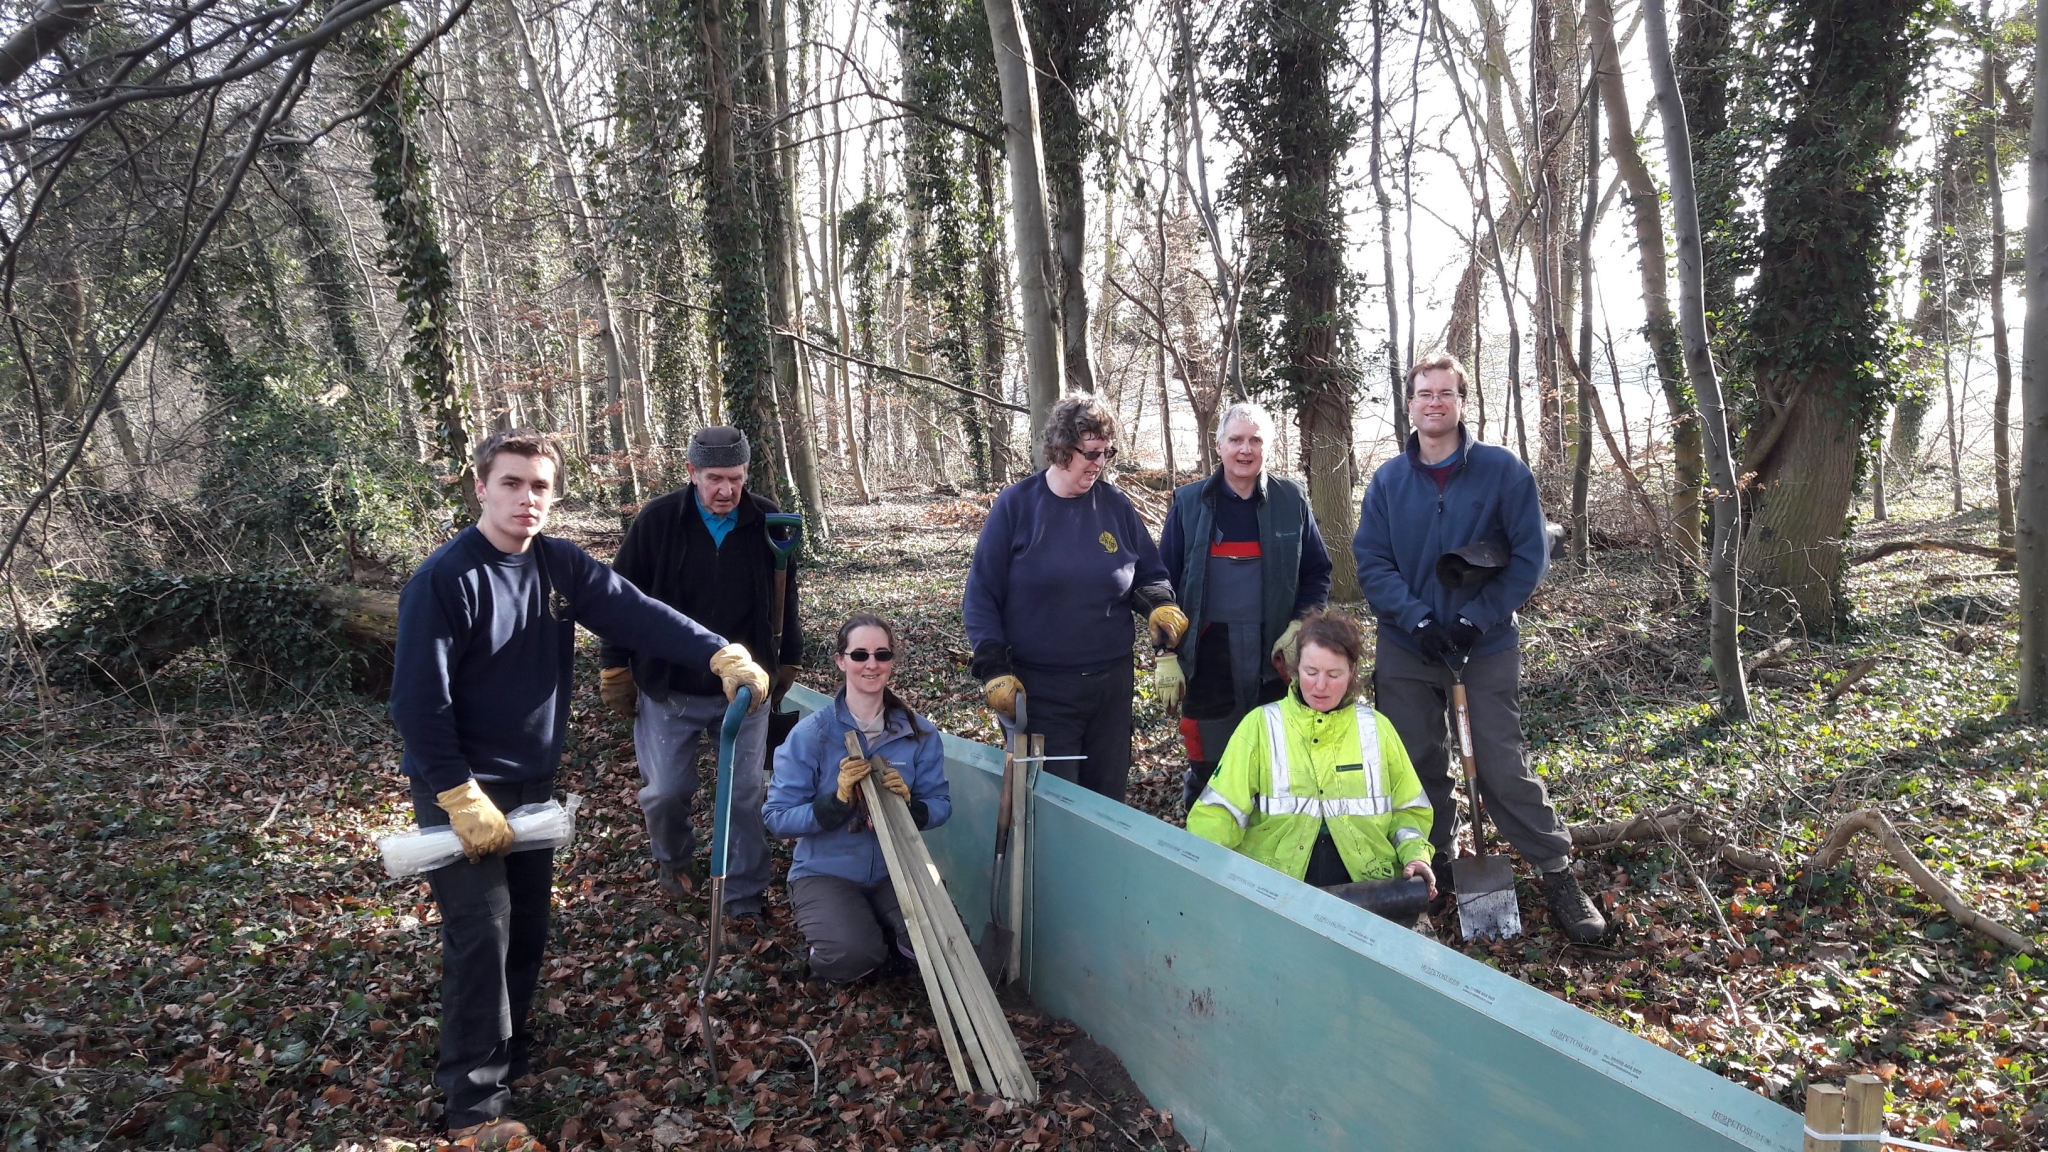 A photo from the FoTF Conservation Event - February 2018 - Erecting the Toad Fence at Cranwich : A group photo of the volunteers by a section of errected fence